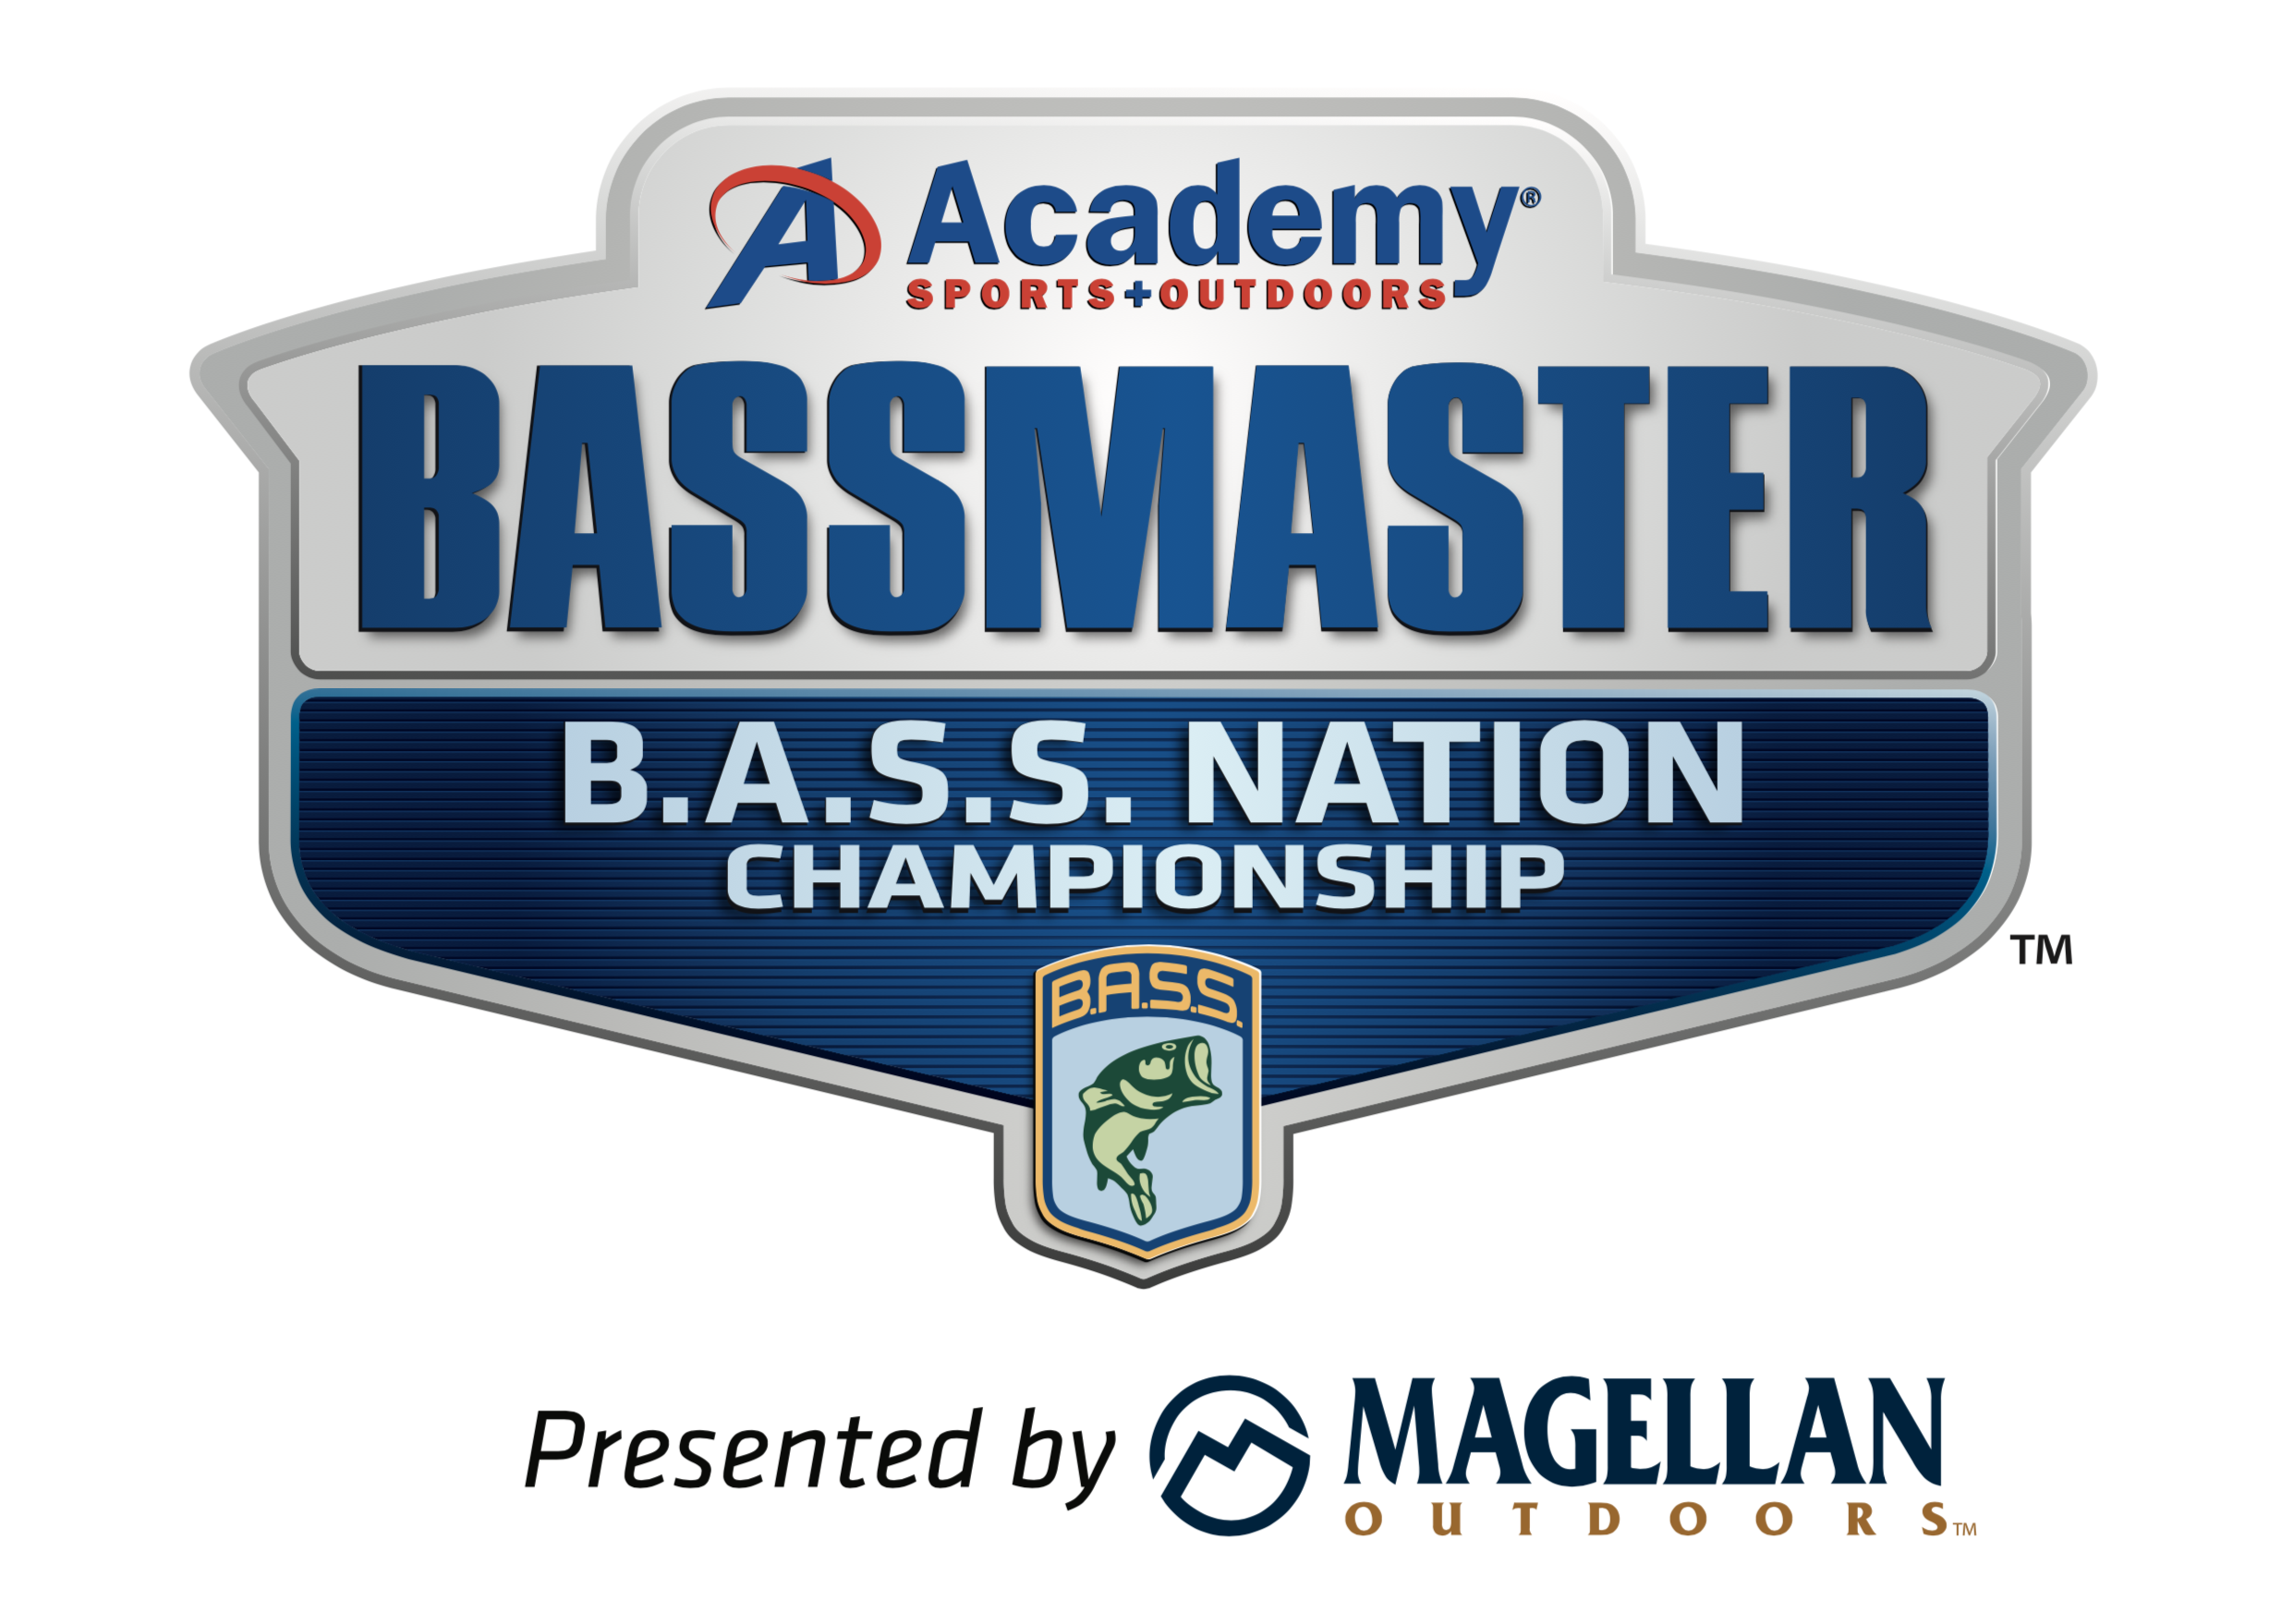 The B.A.S.S. Nation National Championship will take place on Pickwick Lake on November 8-10, 2018, where three anglers will qualify for the Classic.